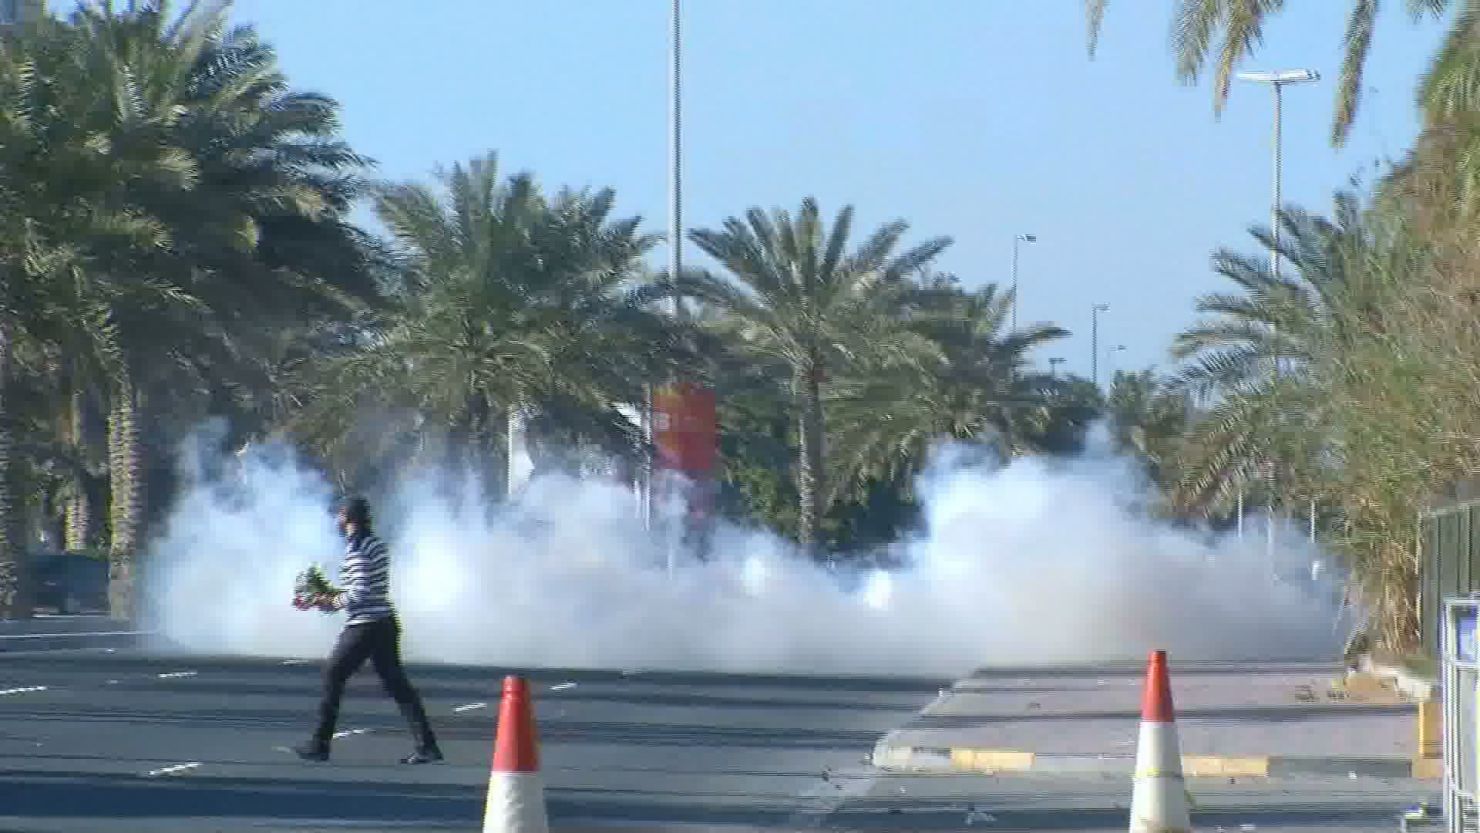 File picture of from Bahrain where it is claimed security forces used tear gas to break up protesters.